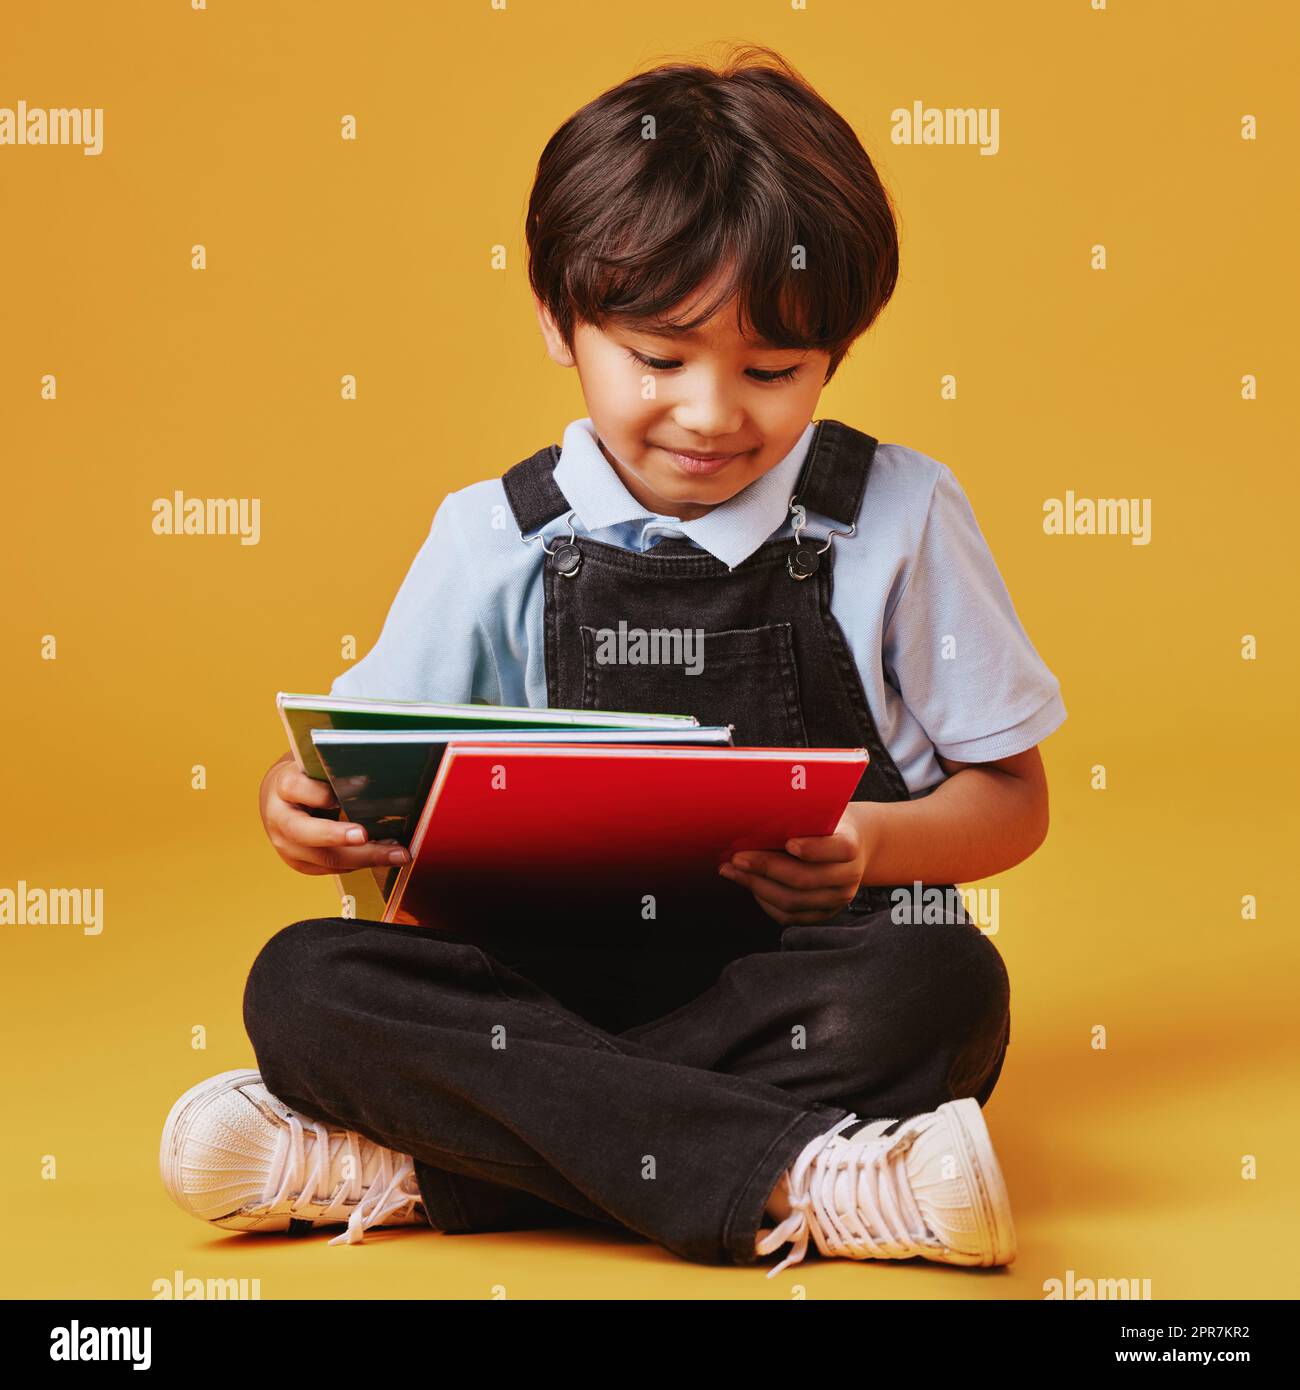 One cute little asian boy sitting on the floor wearing casual clothes while reading against an orange background. Happy and content while focused on education. Child ready for school Stock Photo